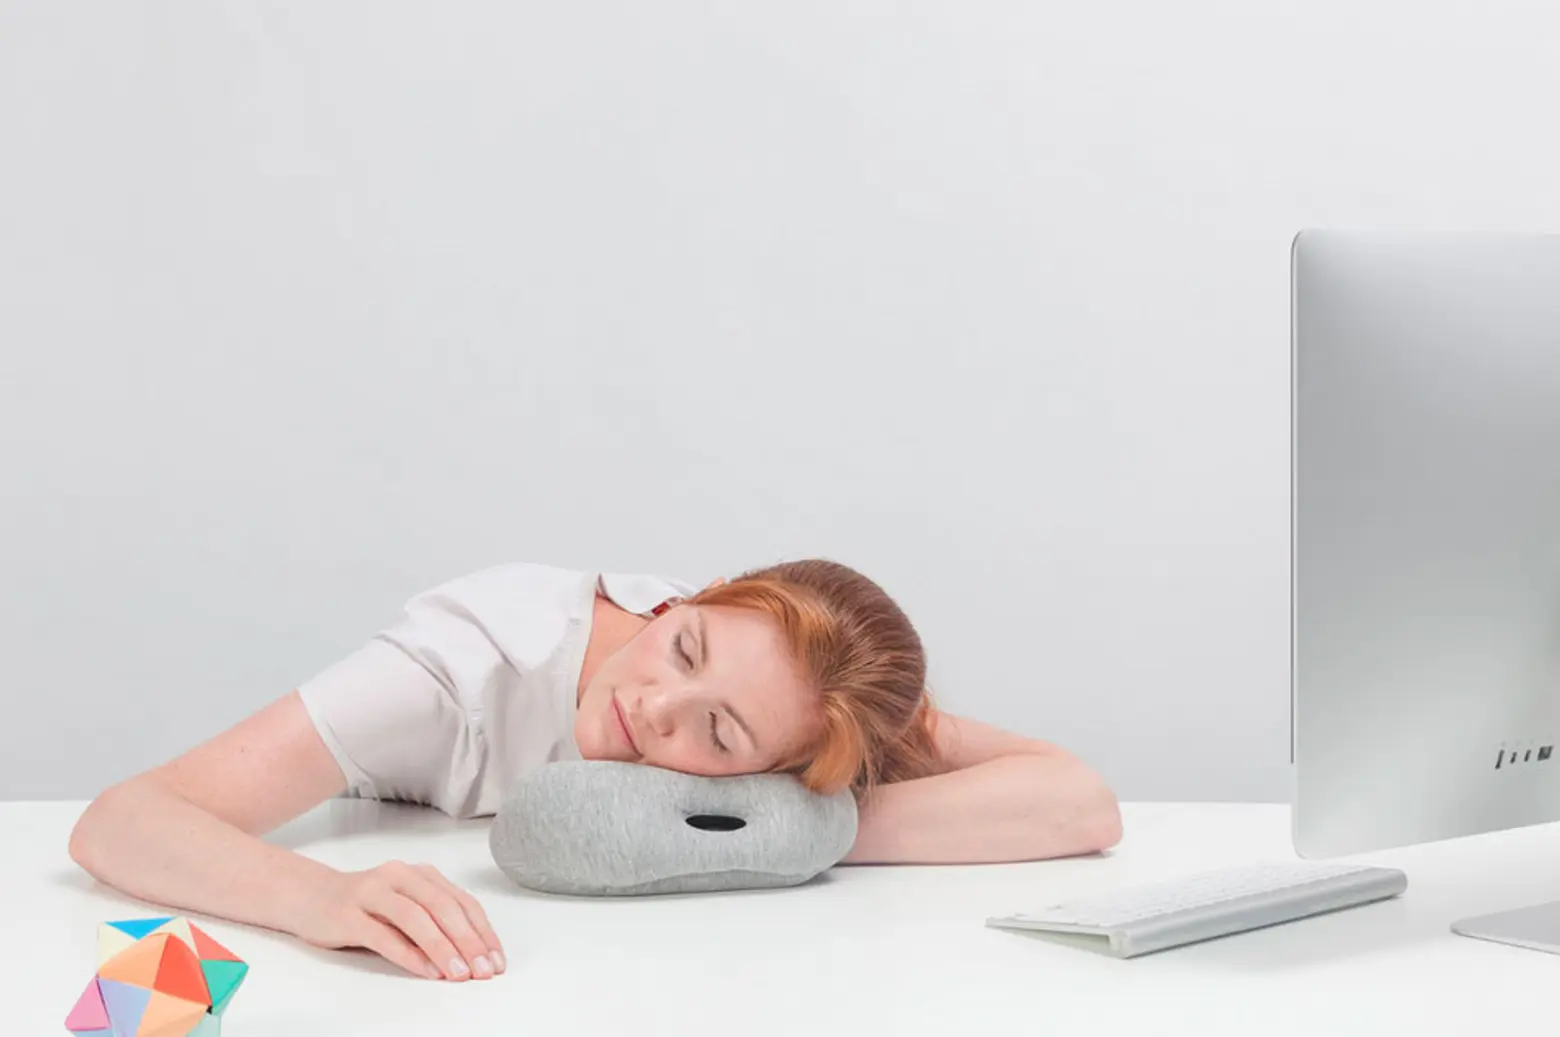 The Ostrich Pillow Mini Arms You with Comfort for Napping On-the-go